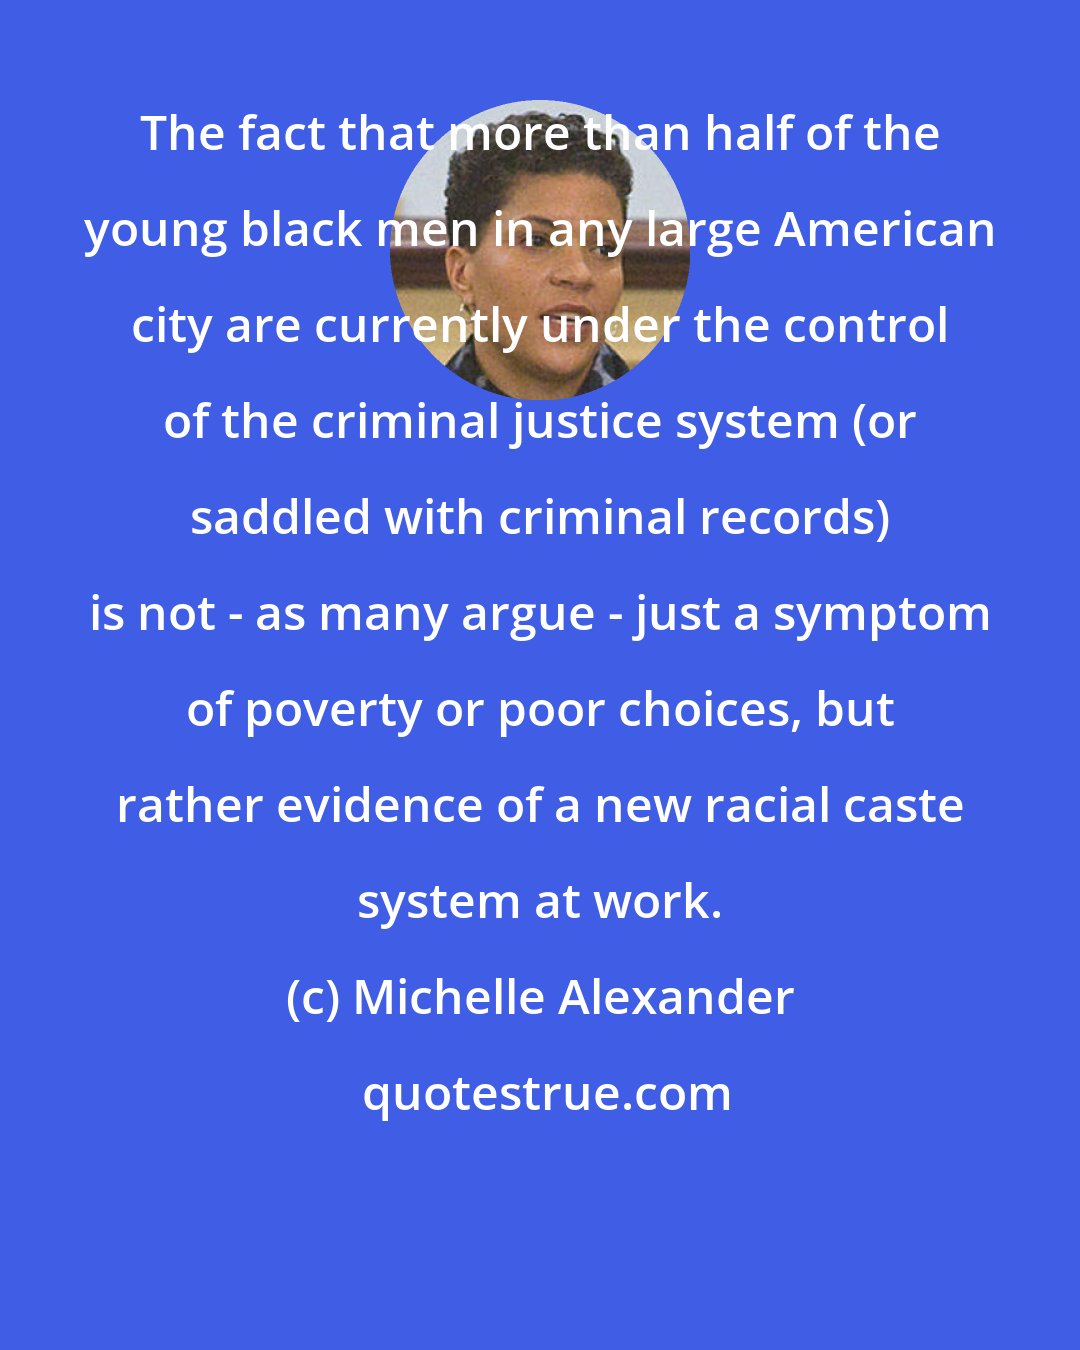 Michelle Alexander: The fact that more than half of the young black men in any large American city are currently under the control of the criminal justice system (or saddled with criminal records) is not - as many argue - just a symptom of poverty or poor choices, but rather evidence of a new racial caste system at work.